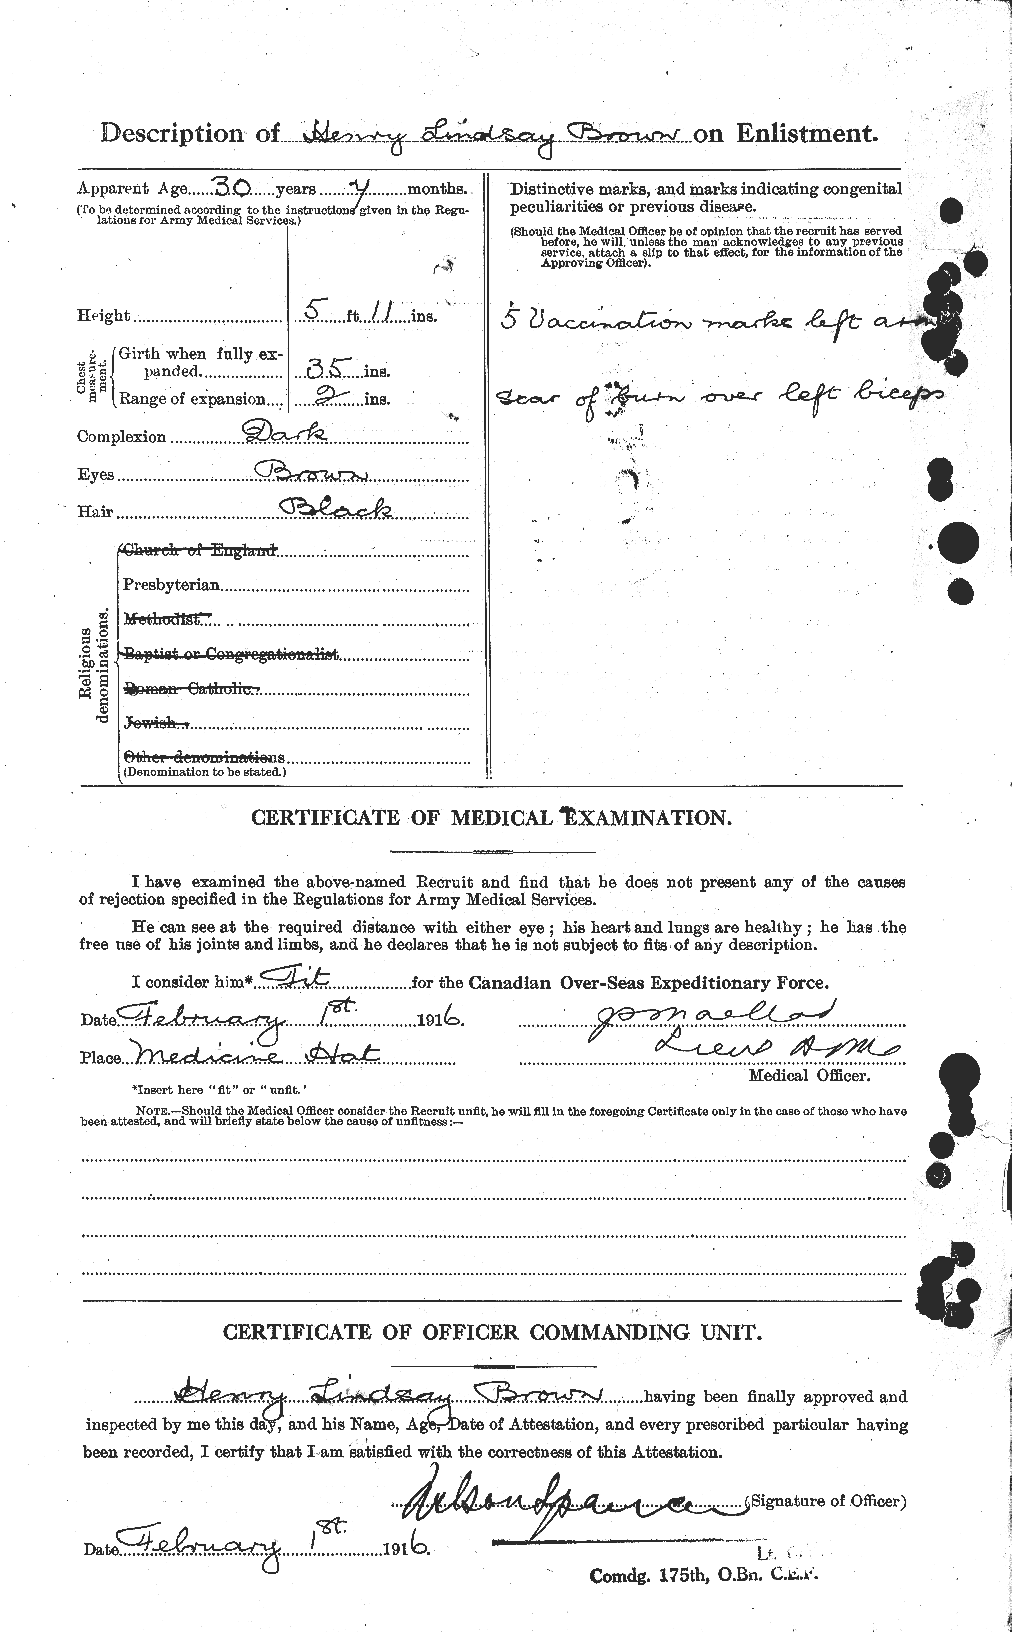 Personnel Records of the First World War - CEF 265533b